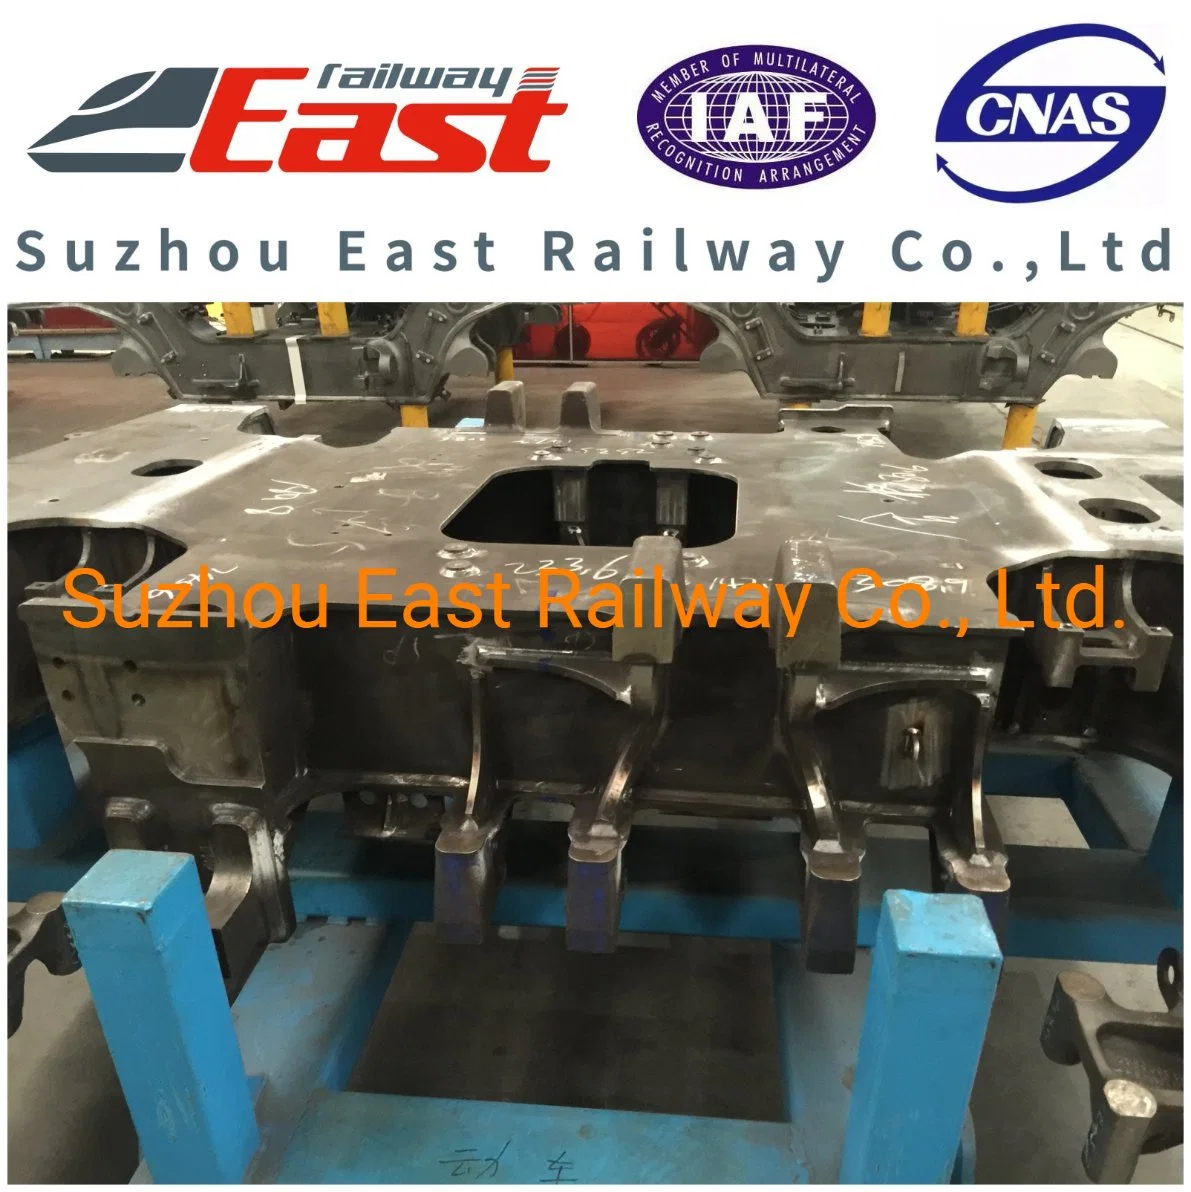 Railway Carbon Steel Car Body for Wagon and Passenger Car